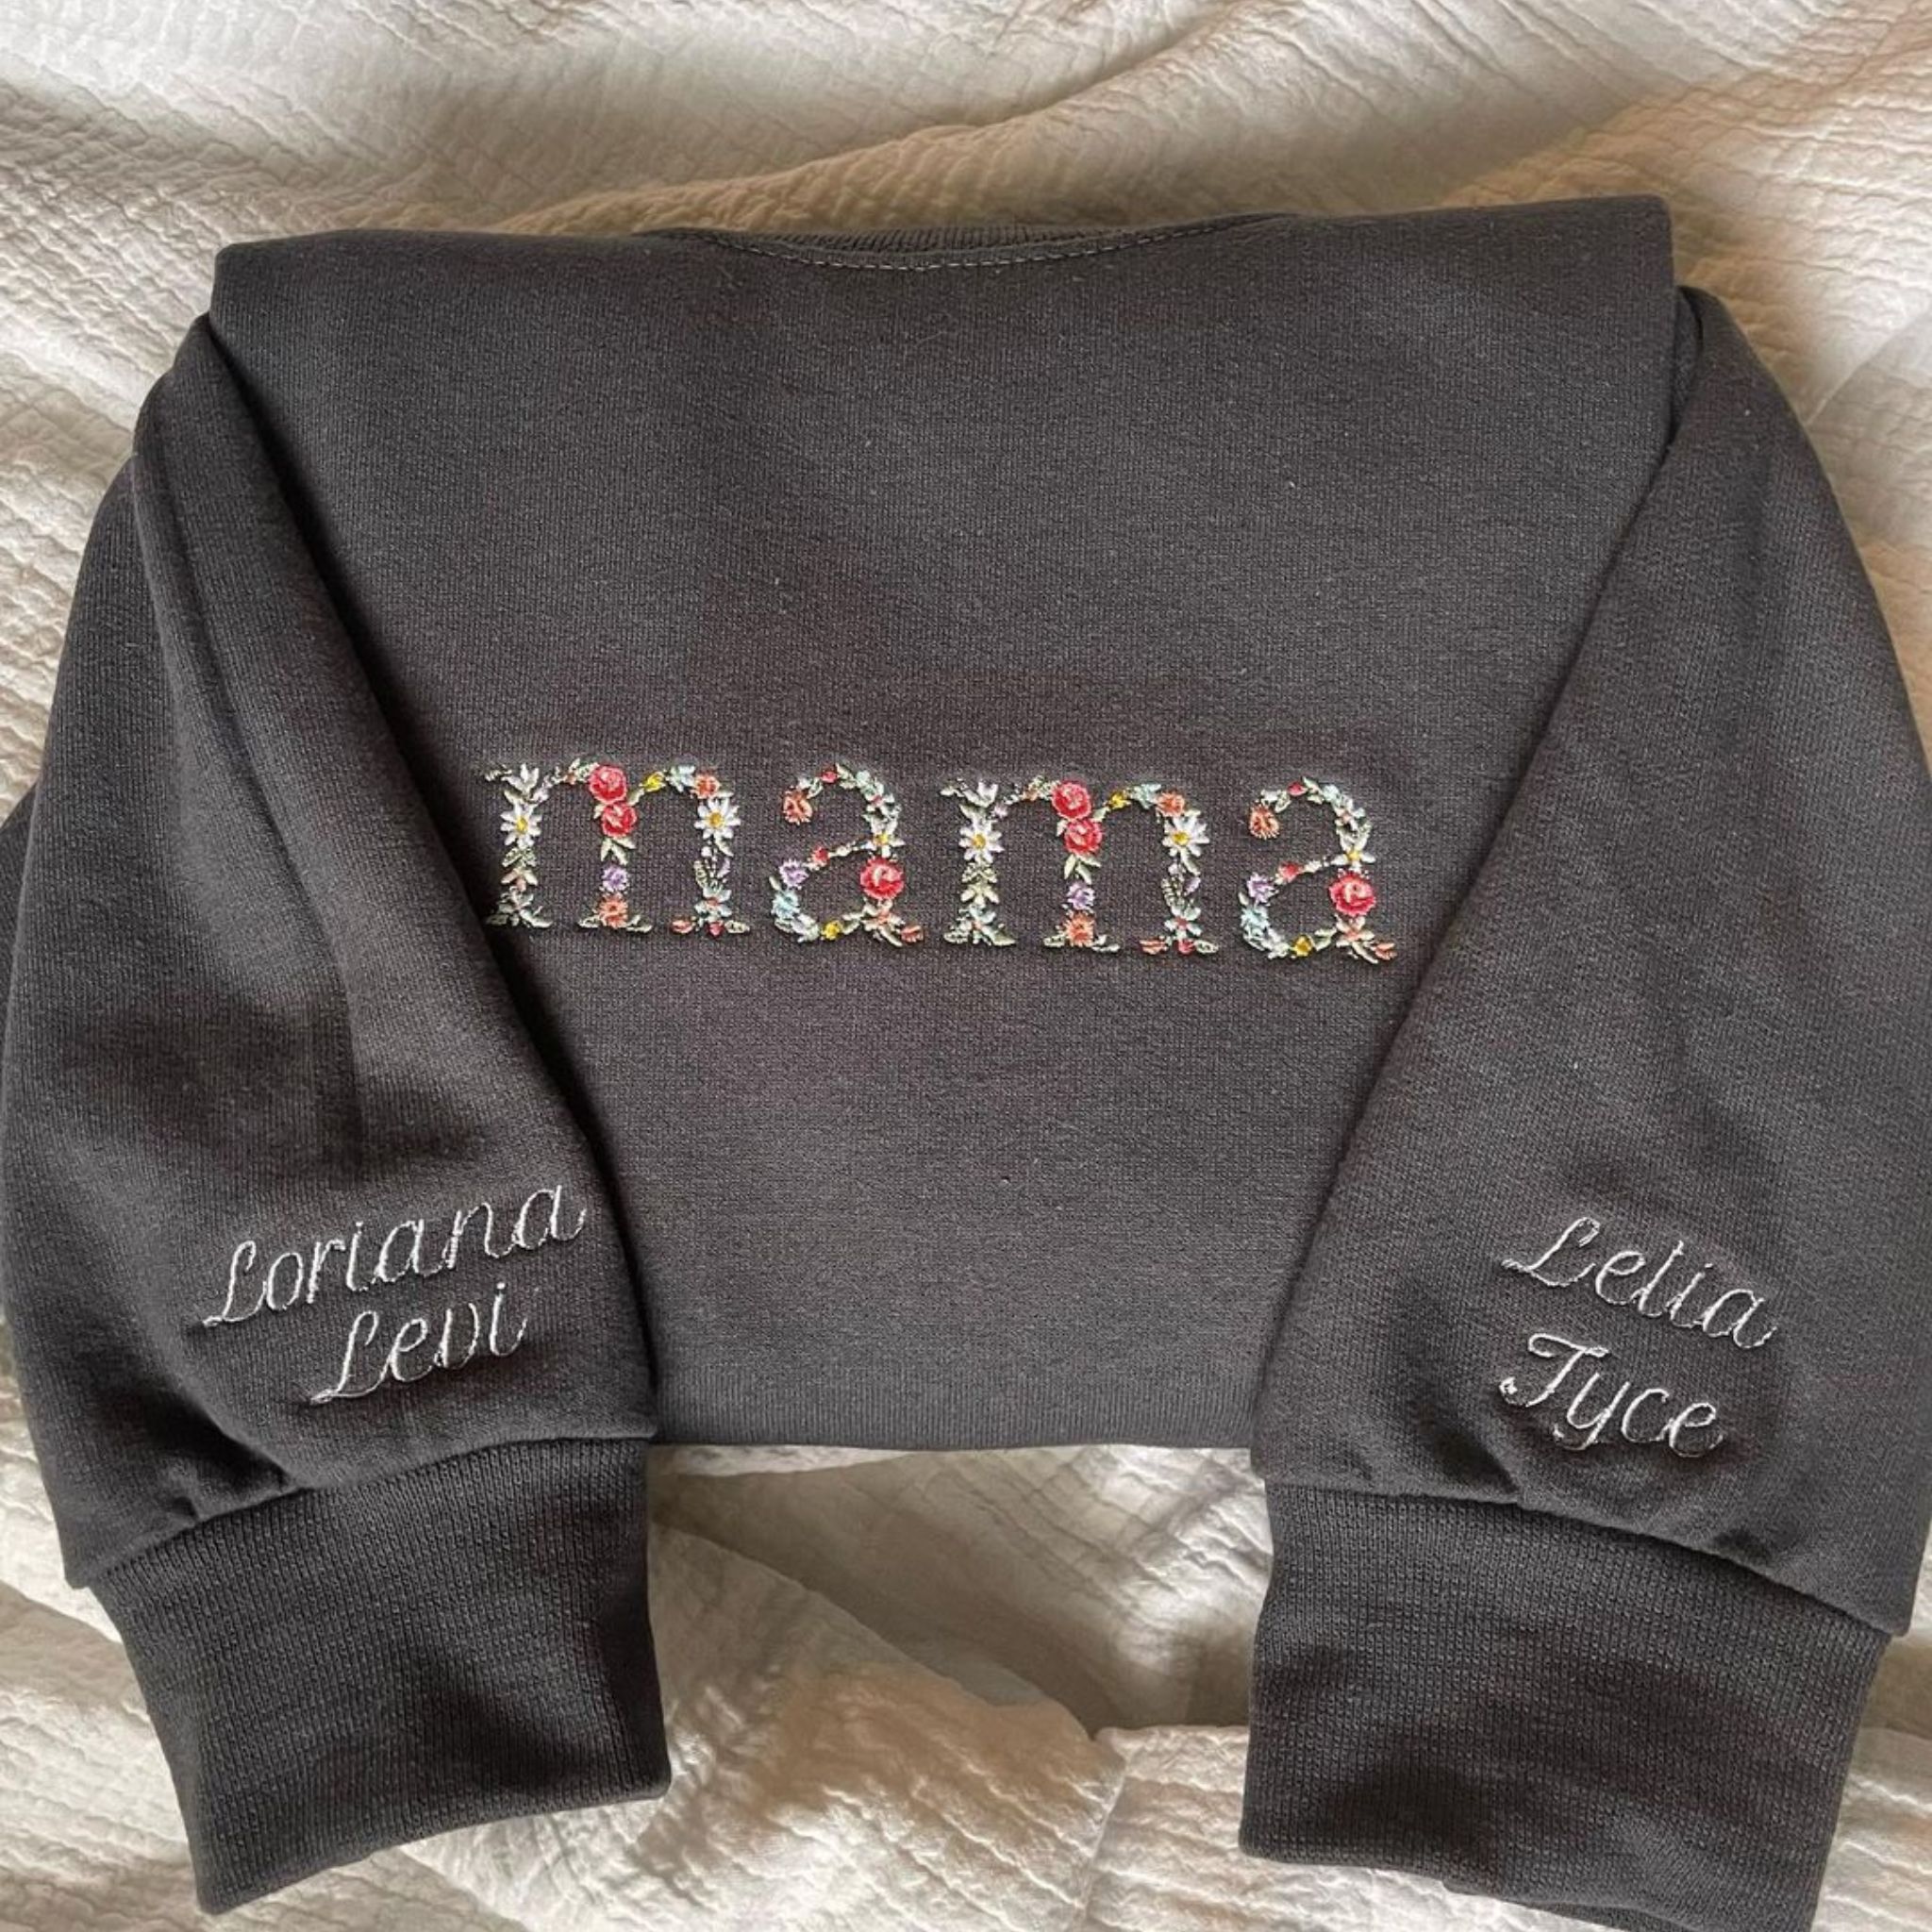 Mother's Day Mama Floral Print Sweatshirt